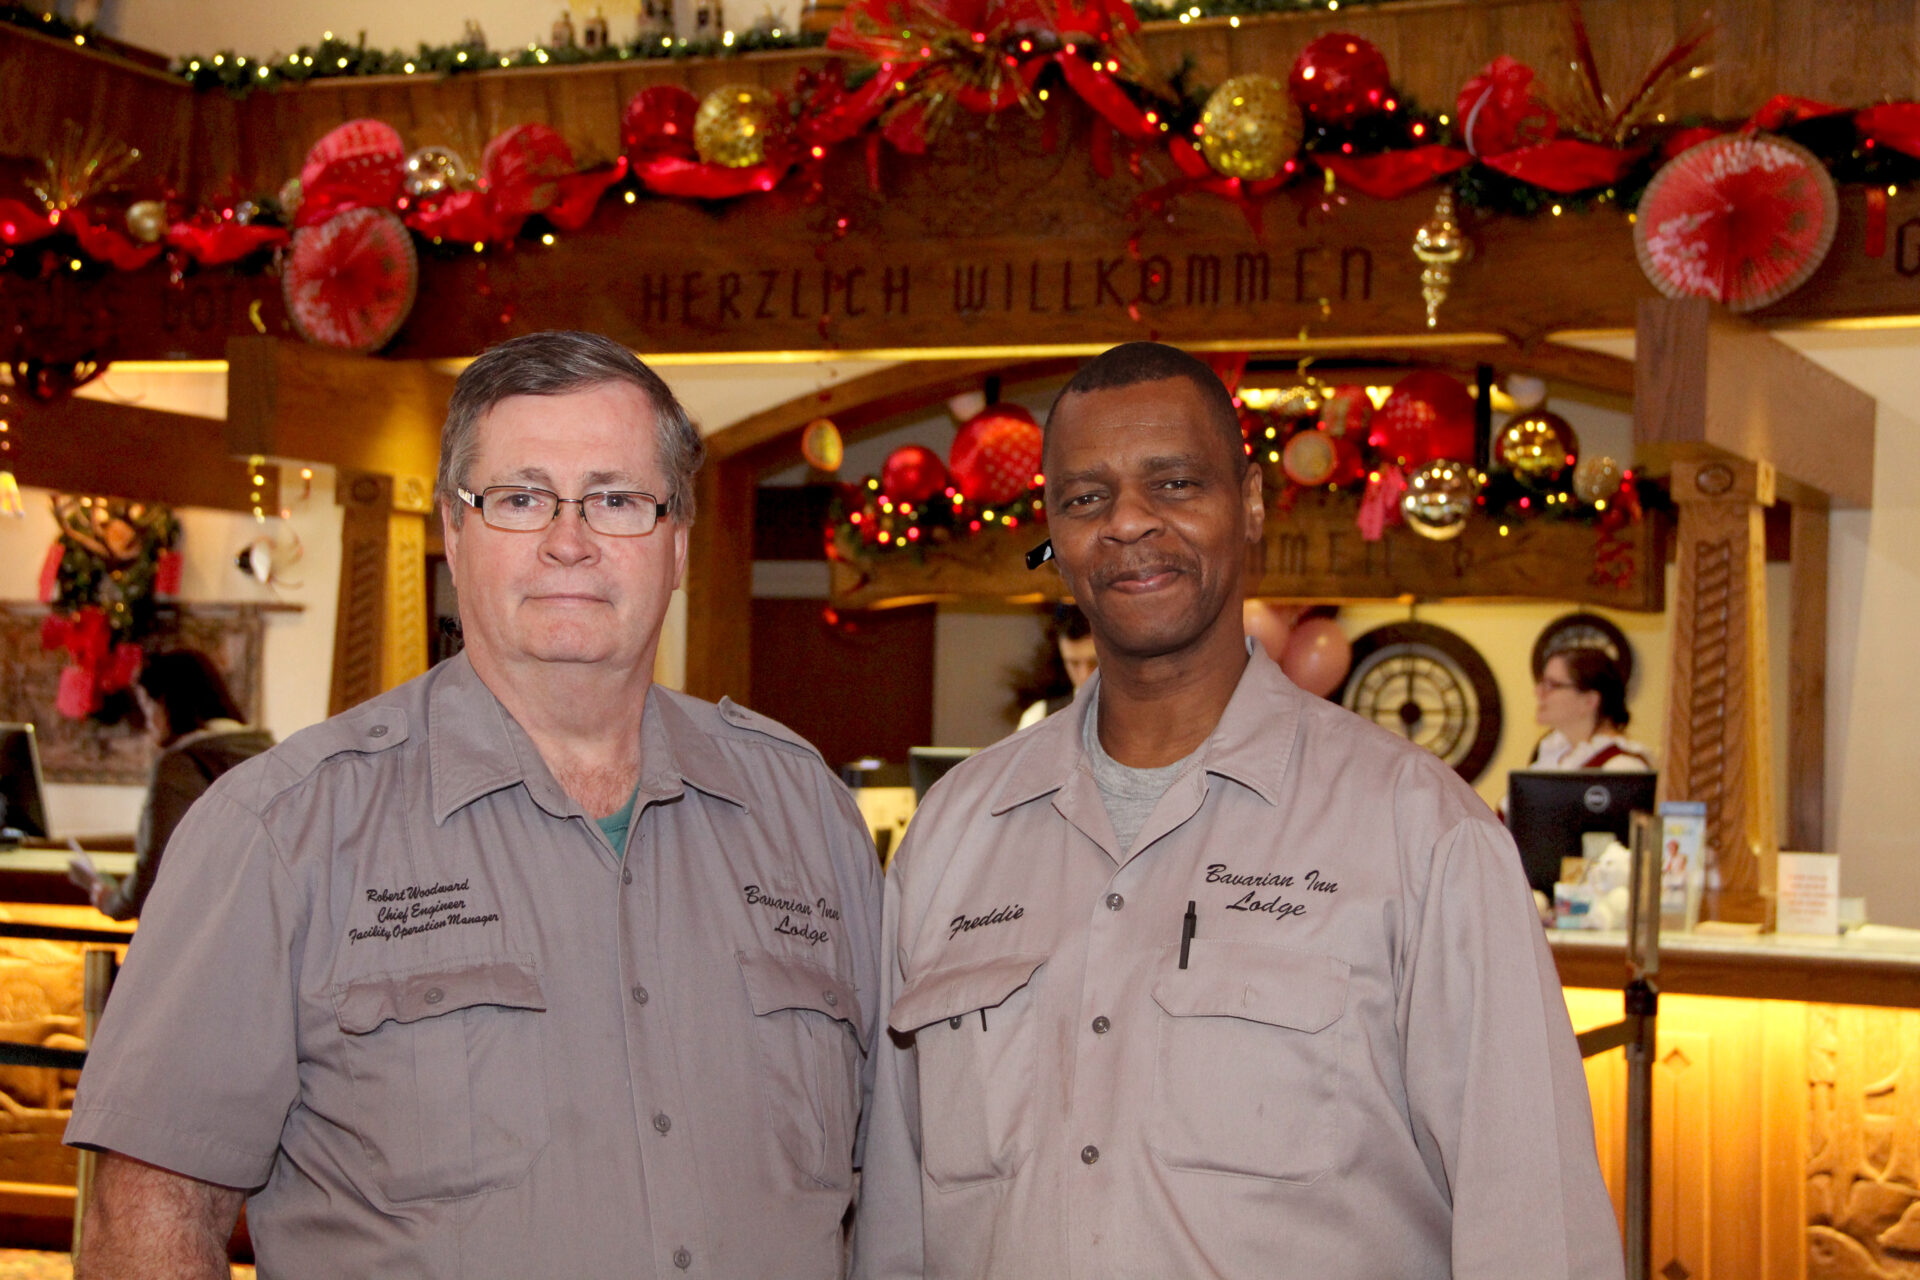 2 Maintenance Staff of the Bavarian Inn Lodge pose for a picture